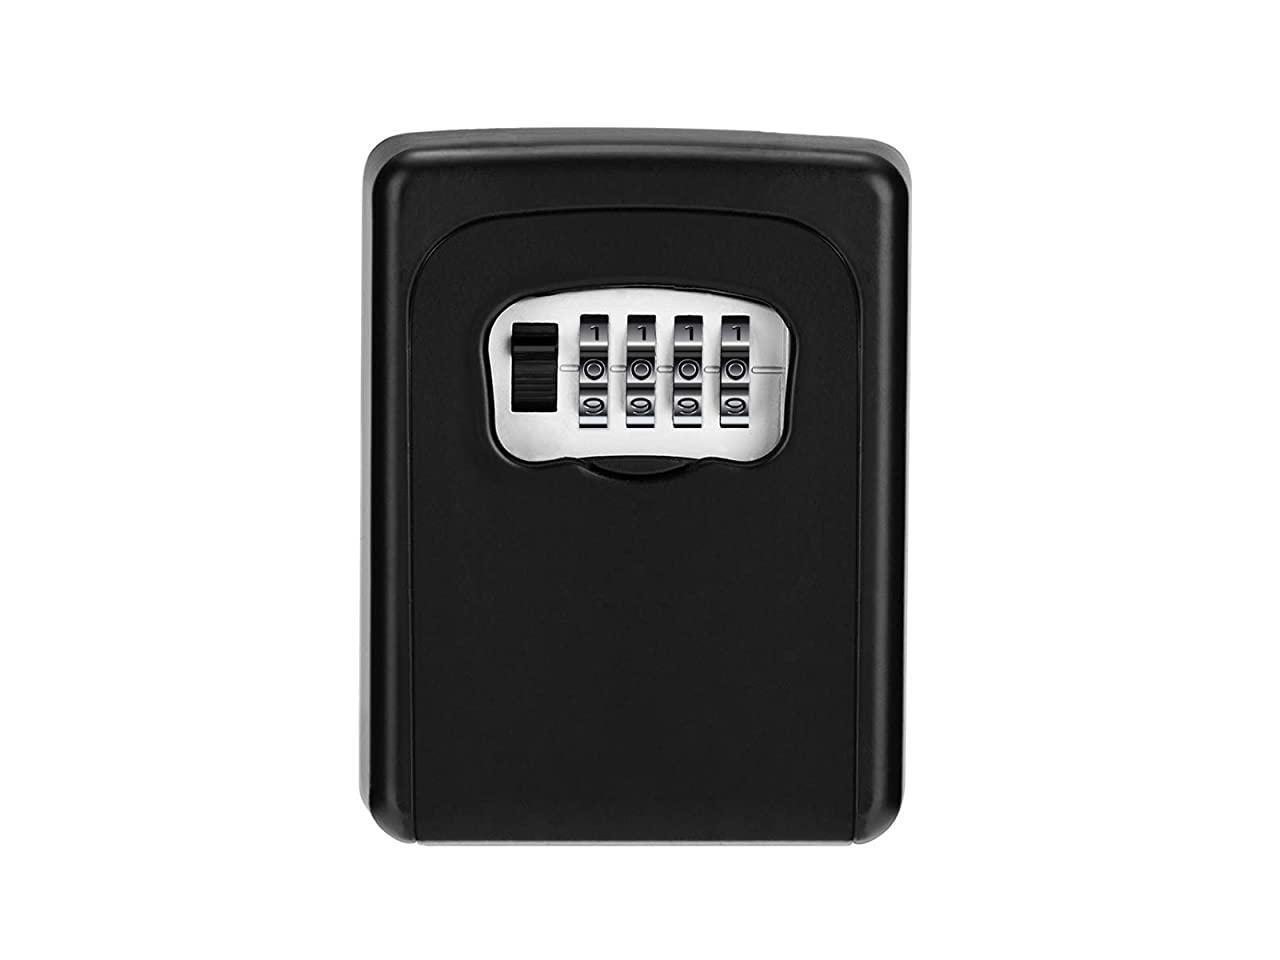 Wall Mounted, Yale Combination Key Lock Safe Security Box 4-Digit Combination 